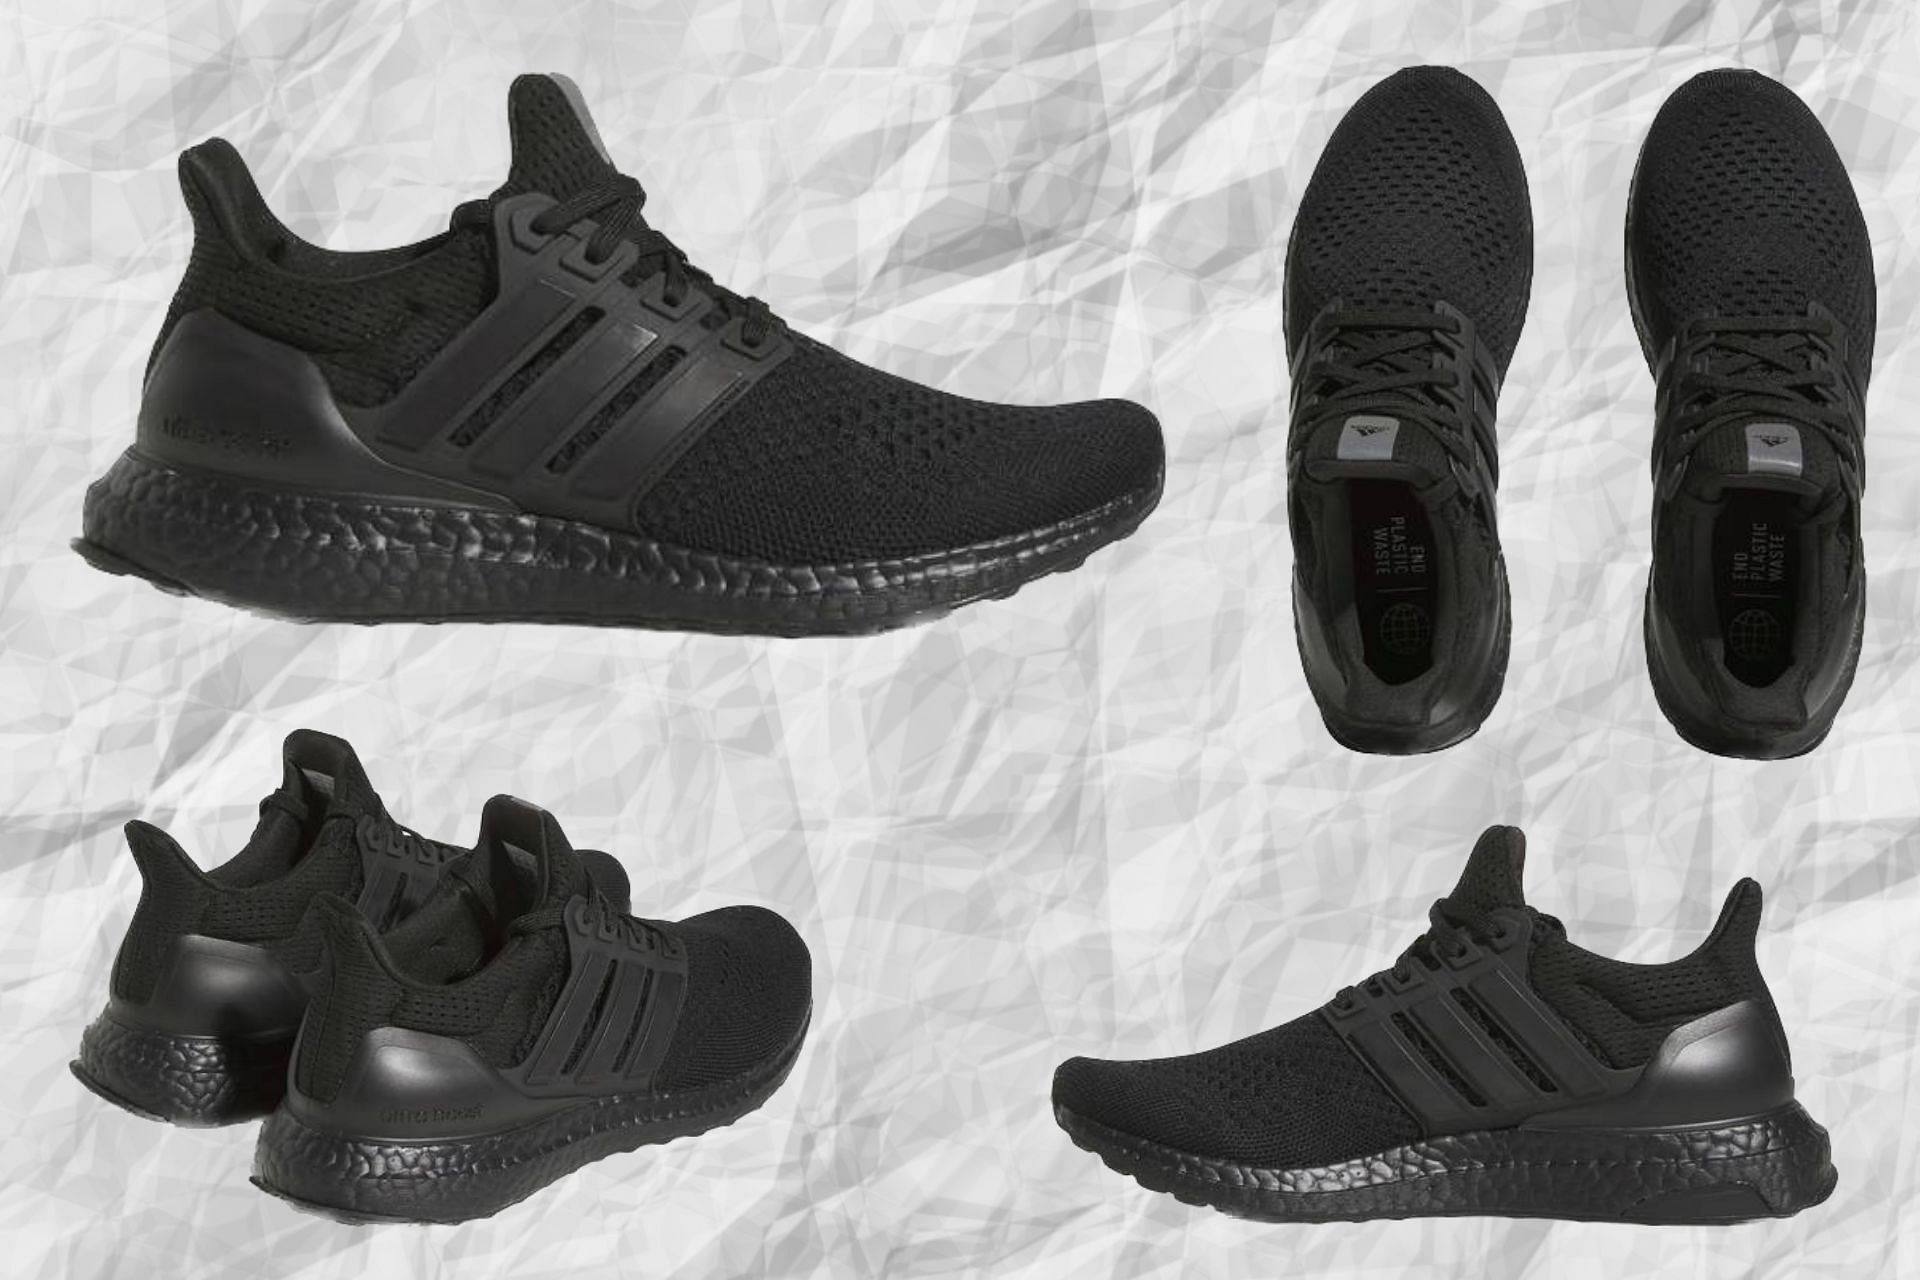 Triple Black: Adidas UltraBOOST “Triple Black” shoes: Where to buy, price,  release date, and more explored